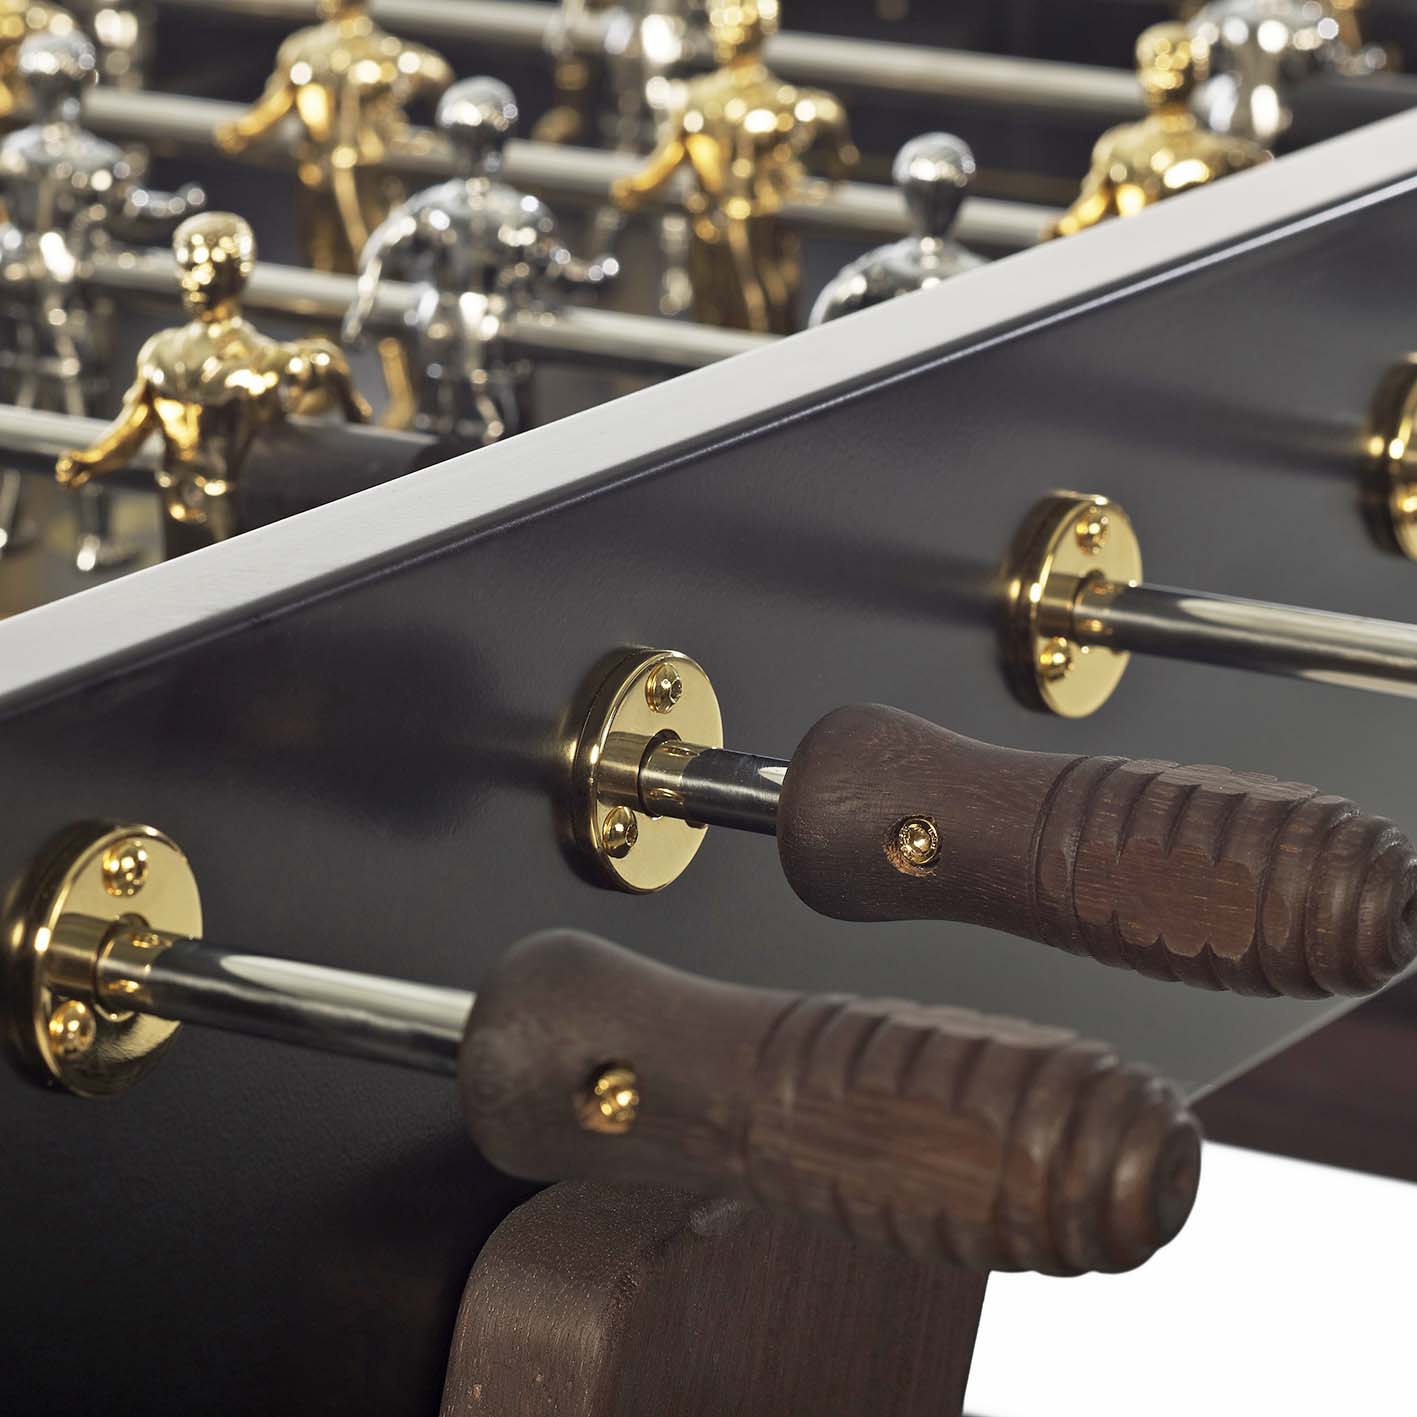 RS3 Wood Foosball Table in Gold Edition